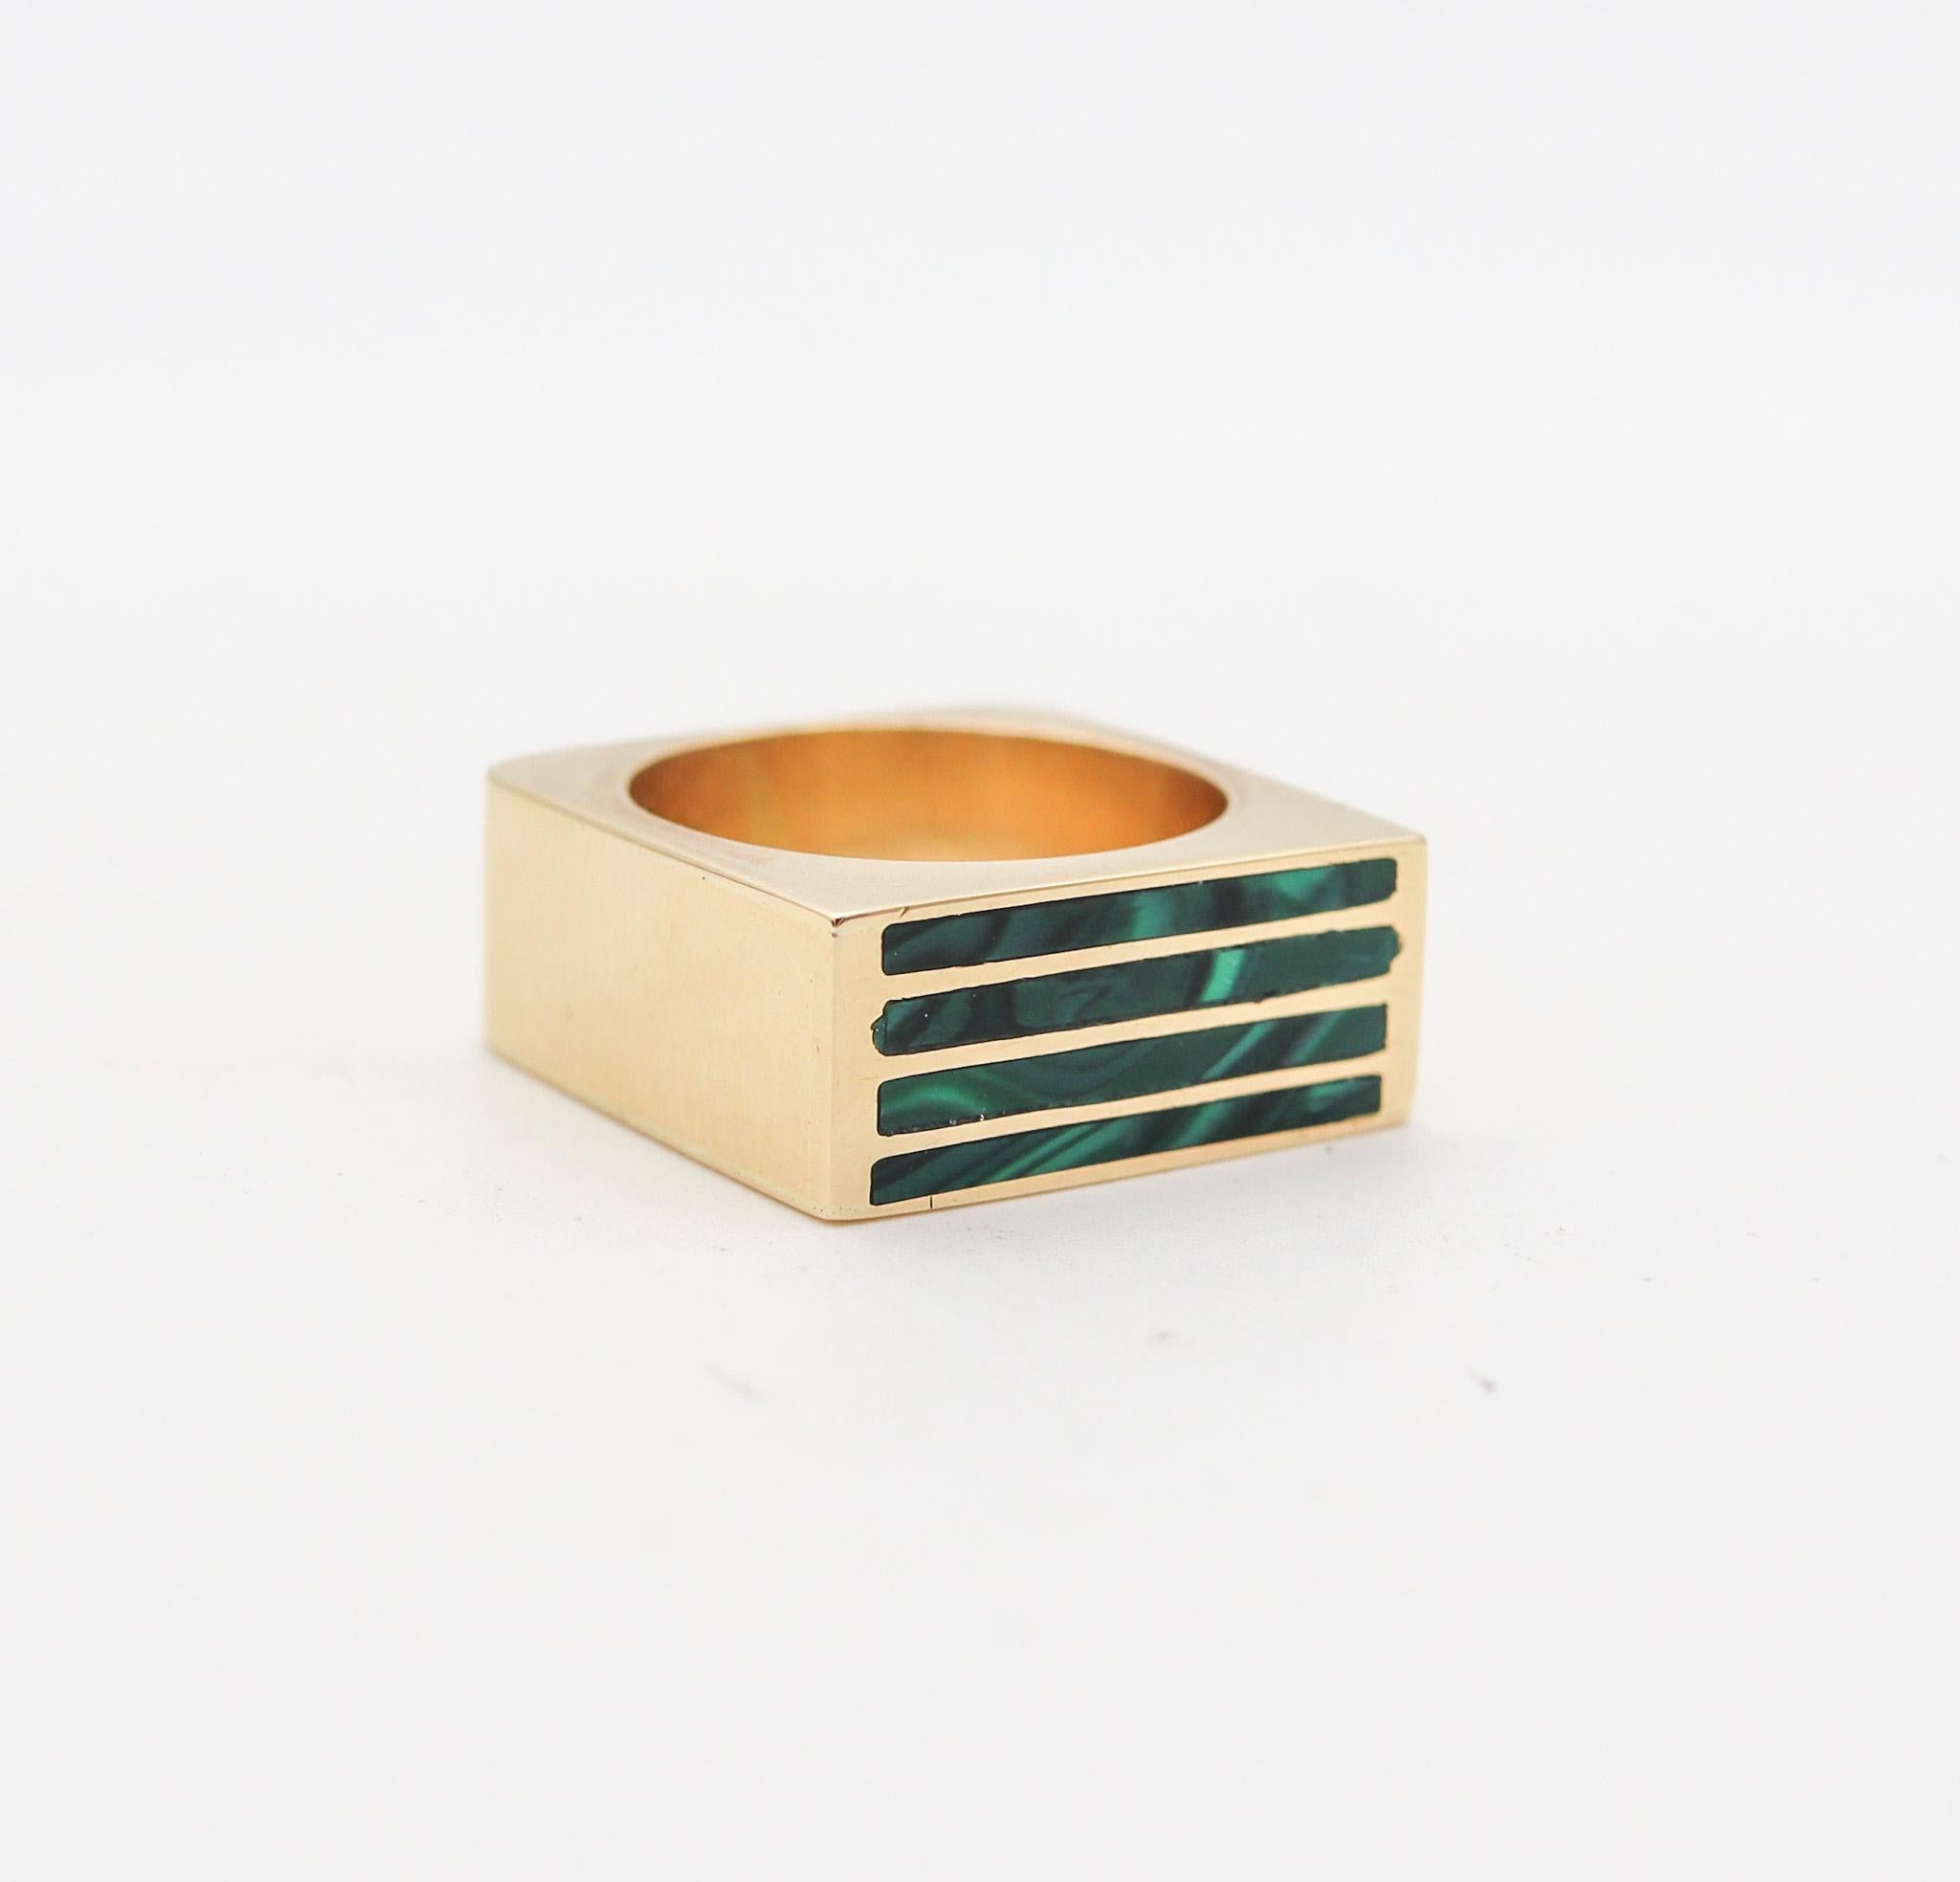 A modernist square geometric ring.

An architectural geometric ring, created in Italy back in the 1970. This unusual squared ring has been made with Bauhaus parameters of the golden rule proportions in mind. It was carefully crafted in solid yellow